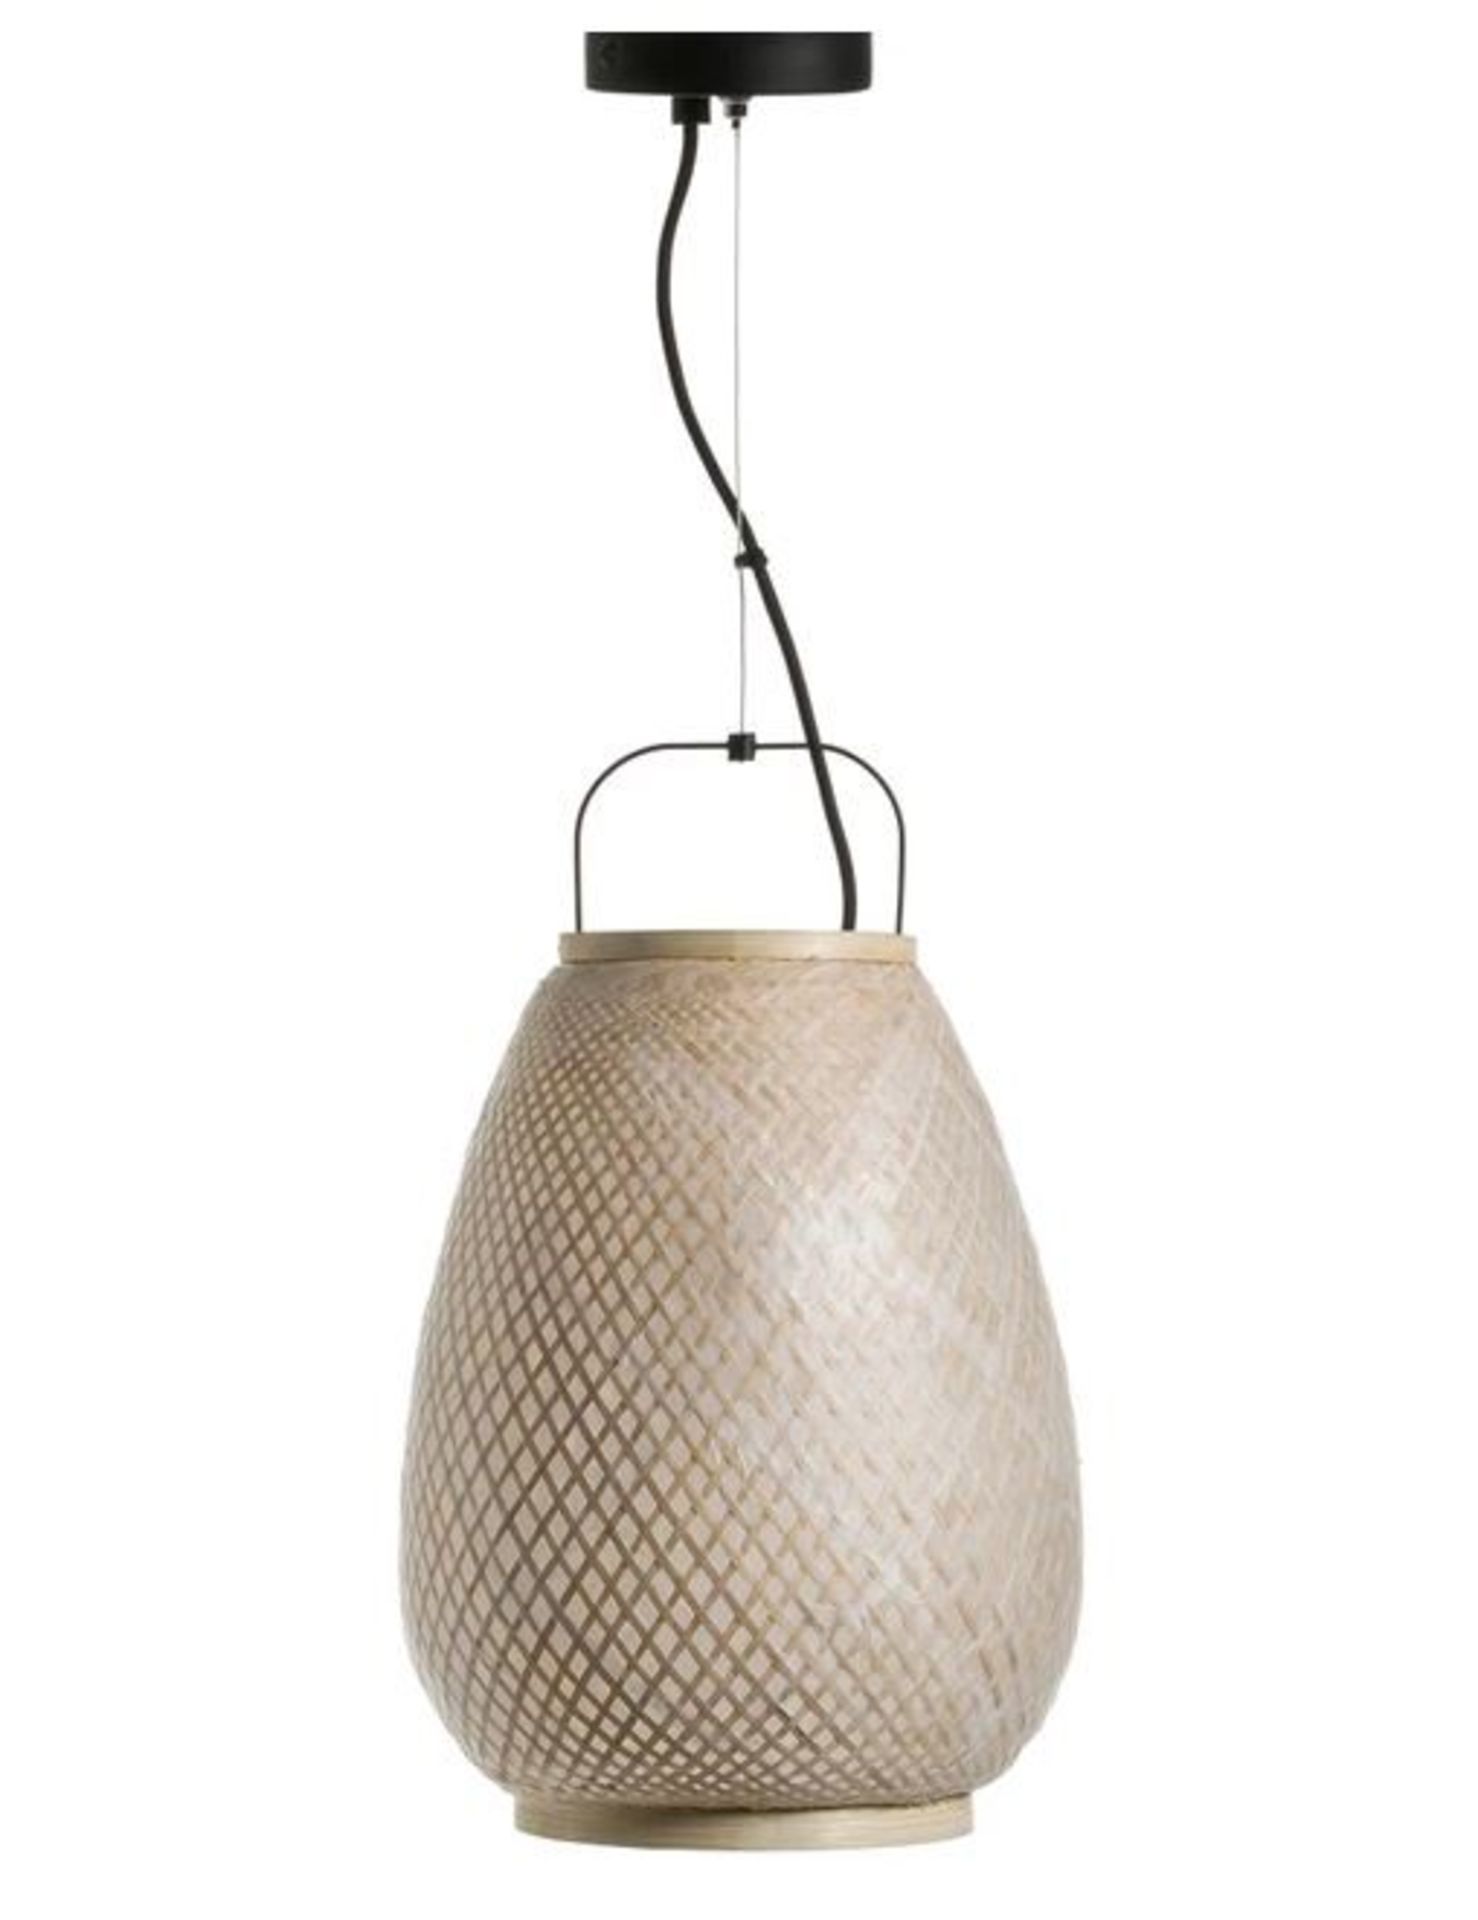 LA REDOUTE TITOUAN BAMBOO & RICE PAPER CEILING LIGHT, BY E. GALLINA